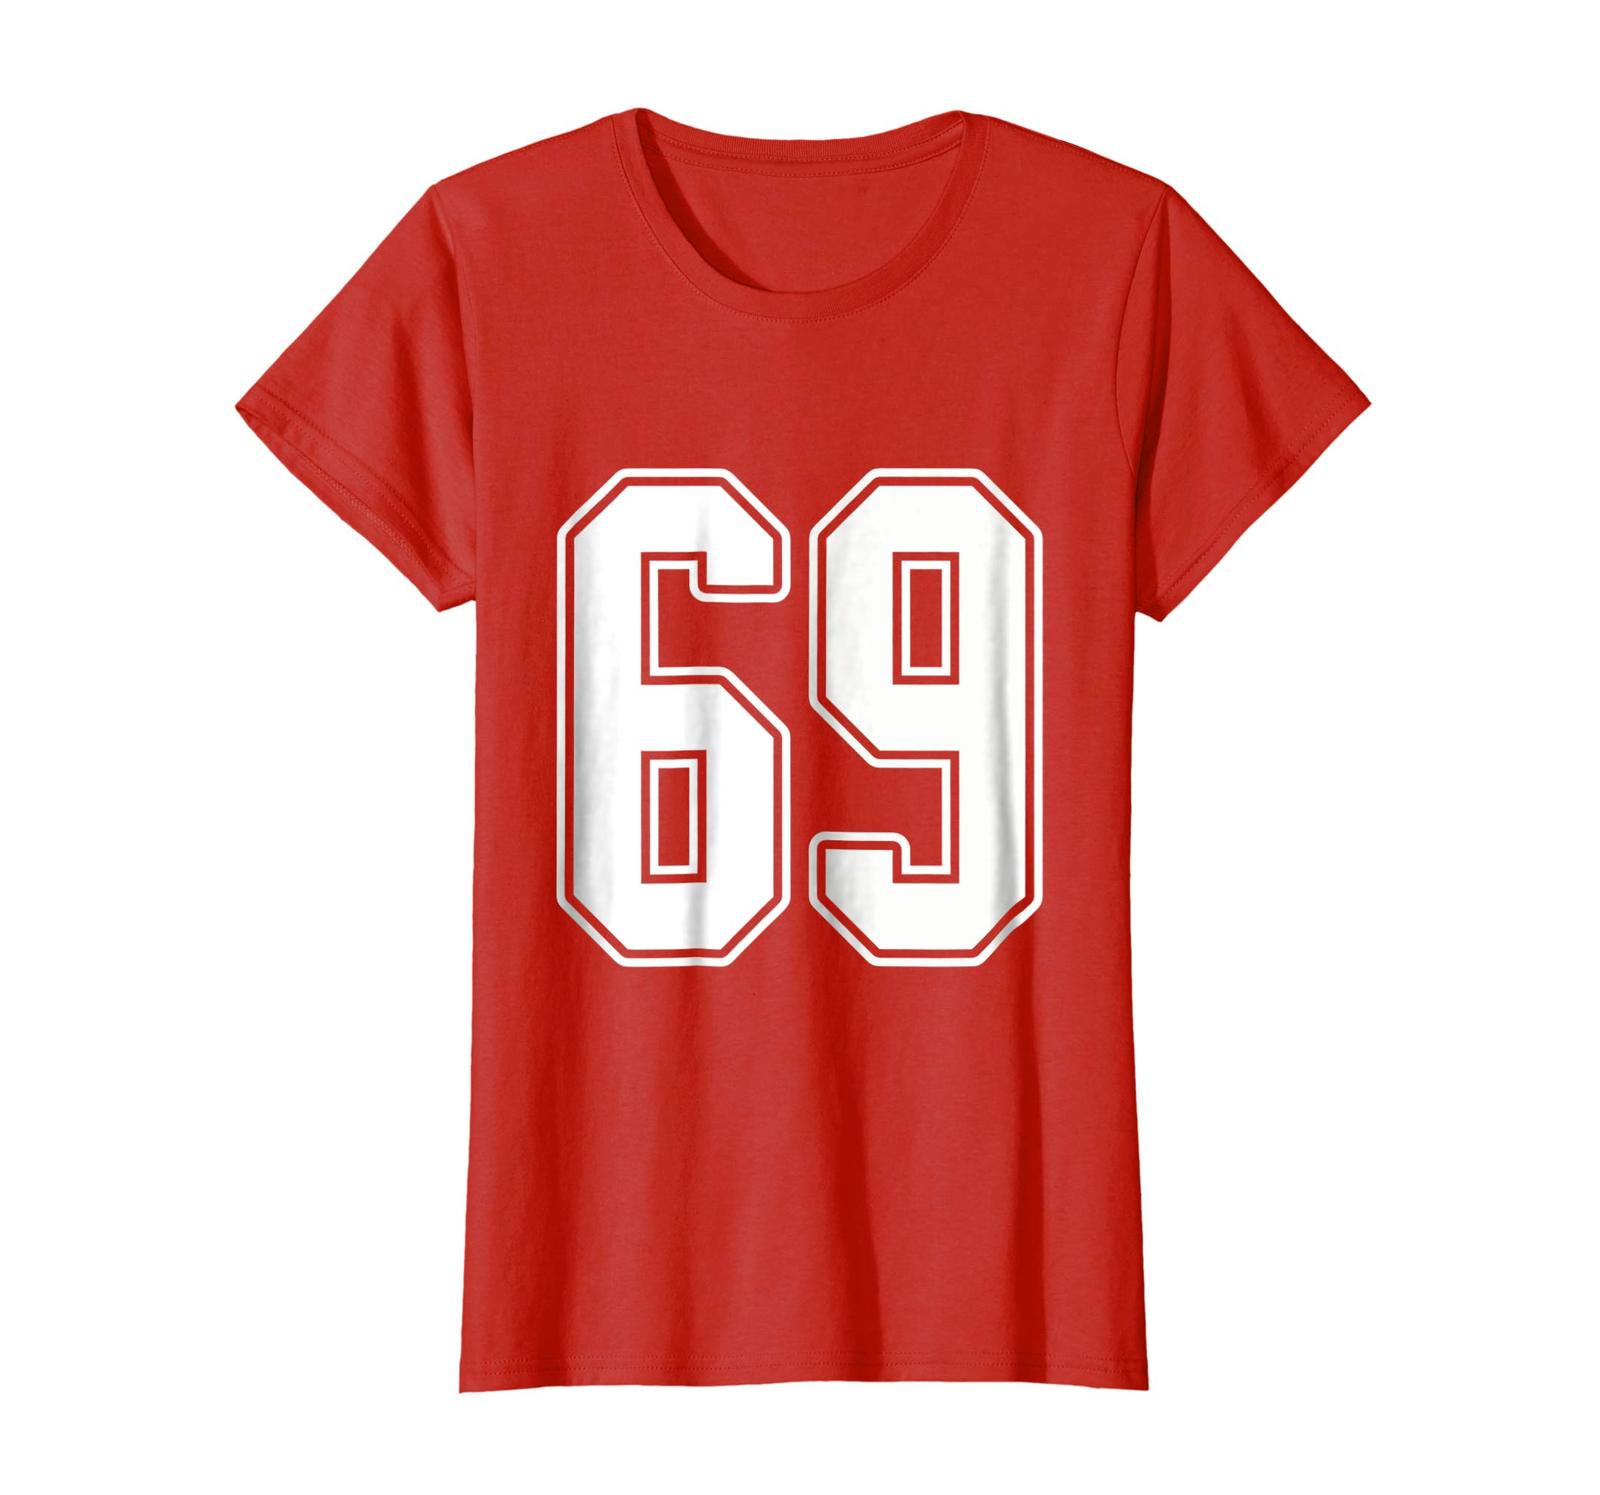 Funny Shirts - #69 White Outline Number 69 Sports Fan Jersey Style T ...